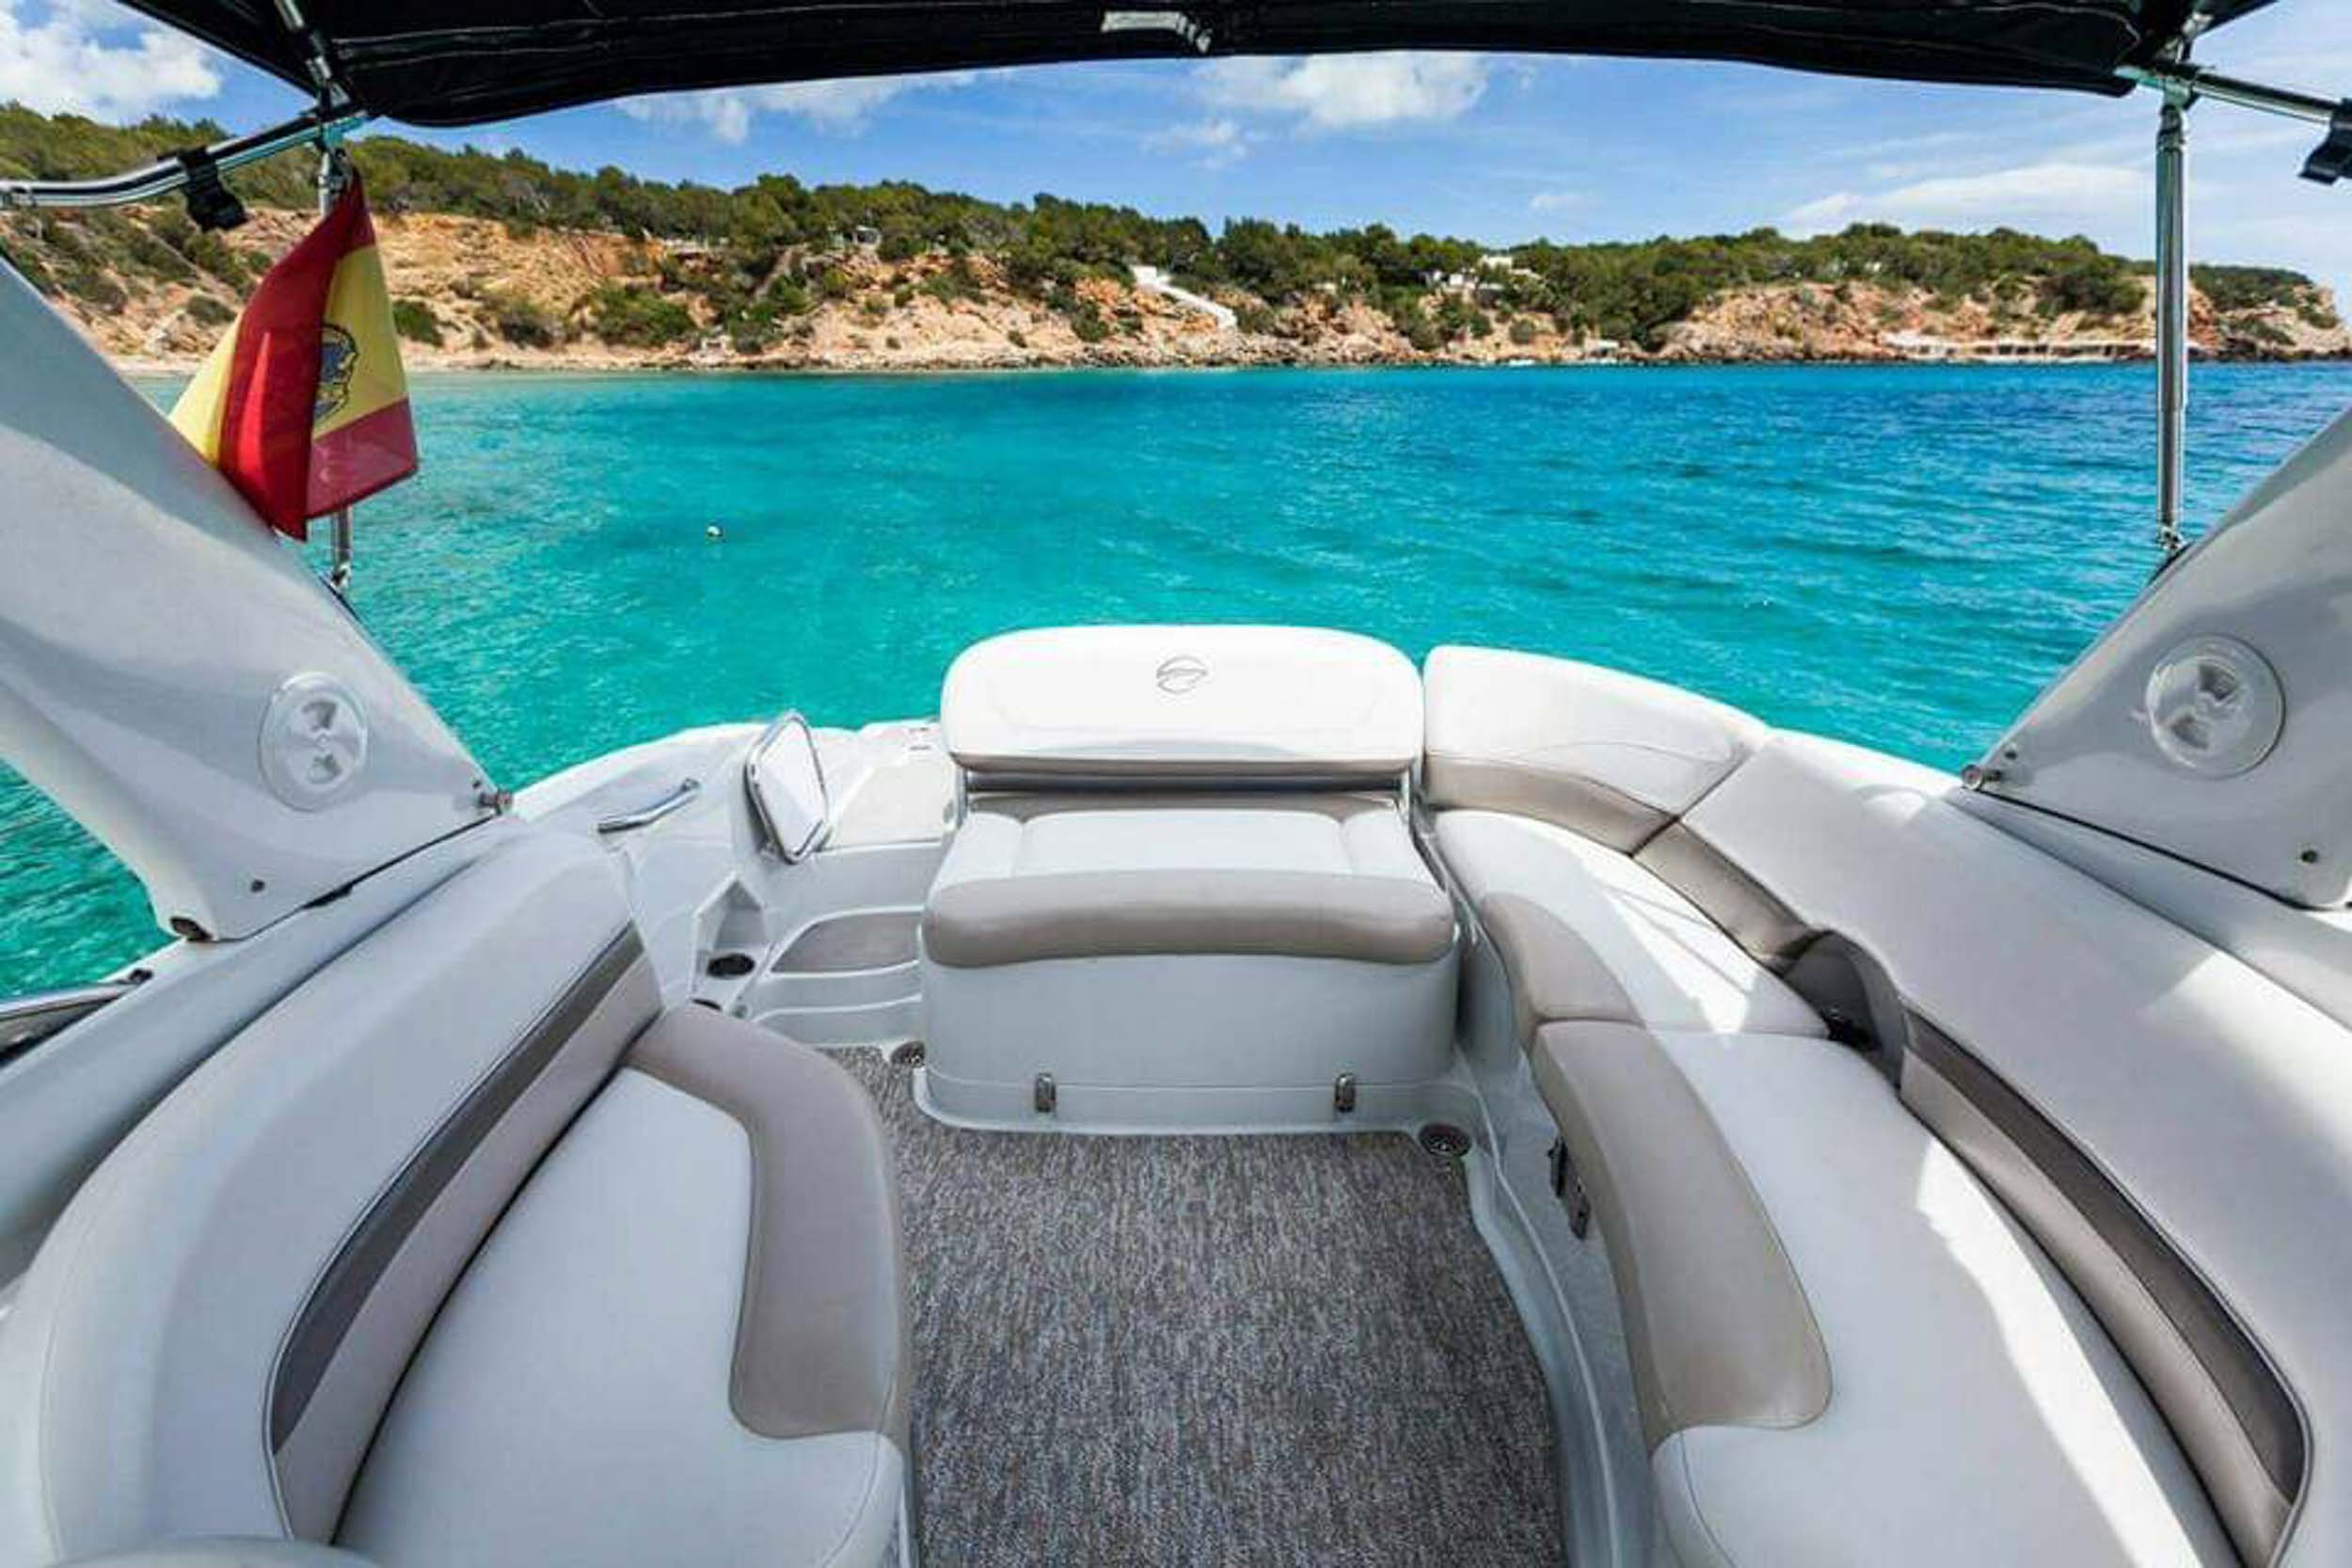 View from one of the boats in Ibiza